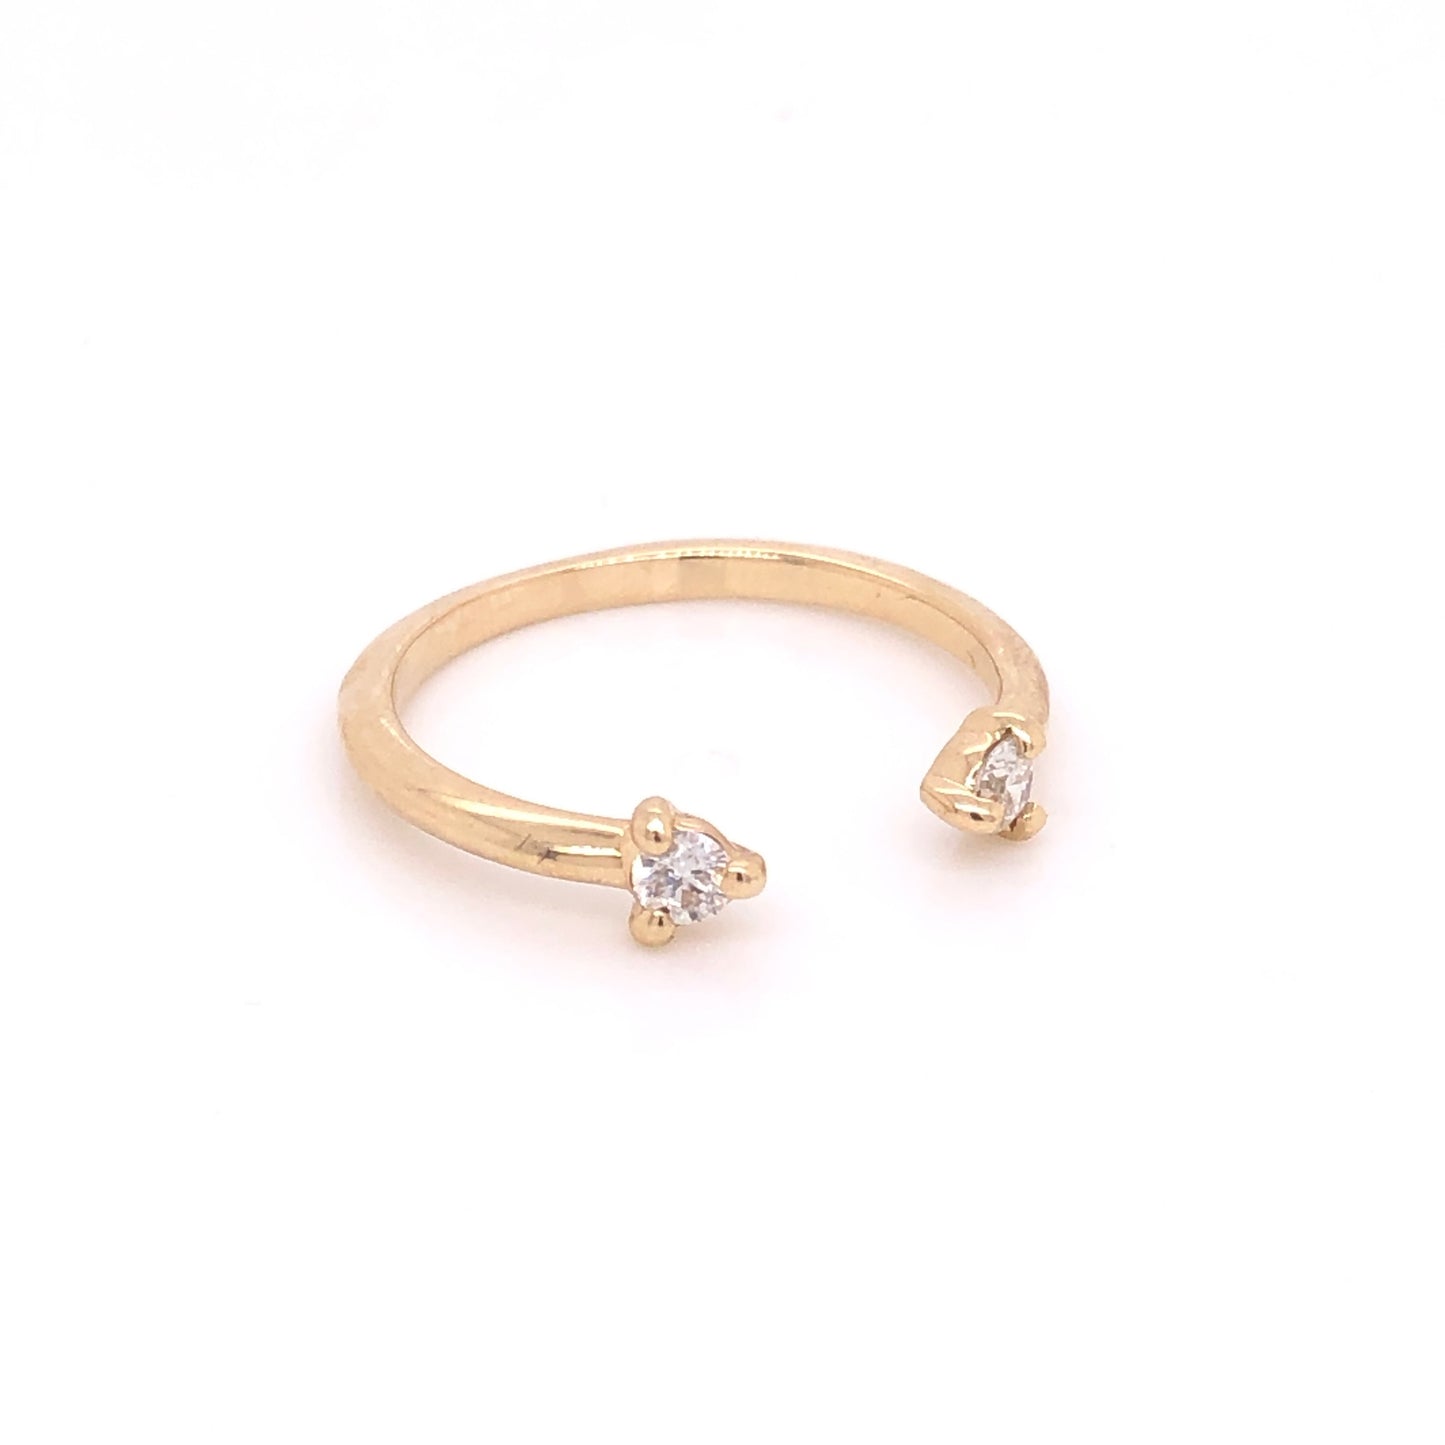 IMMEDIATE DELIVERY / Eva Ring With Diamonds / 14k Yellow Gold / Size 7